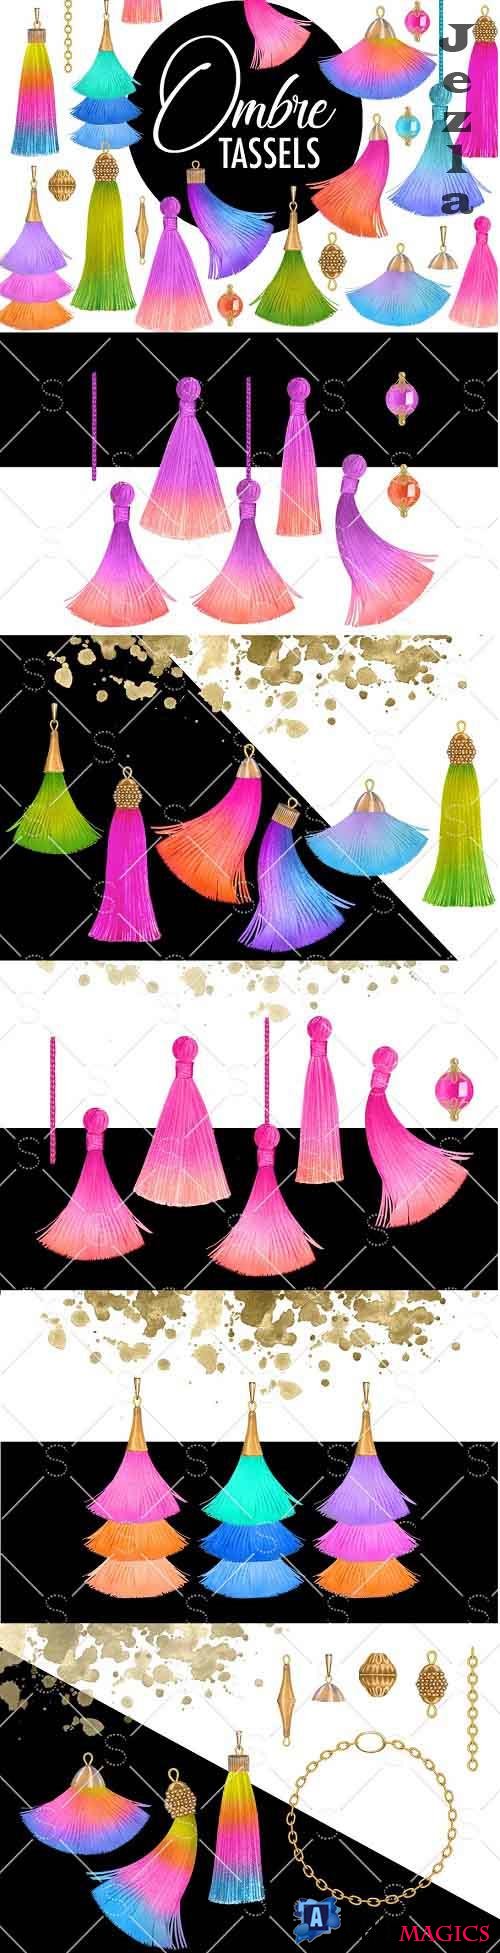 Ombre Tassels - 3096607